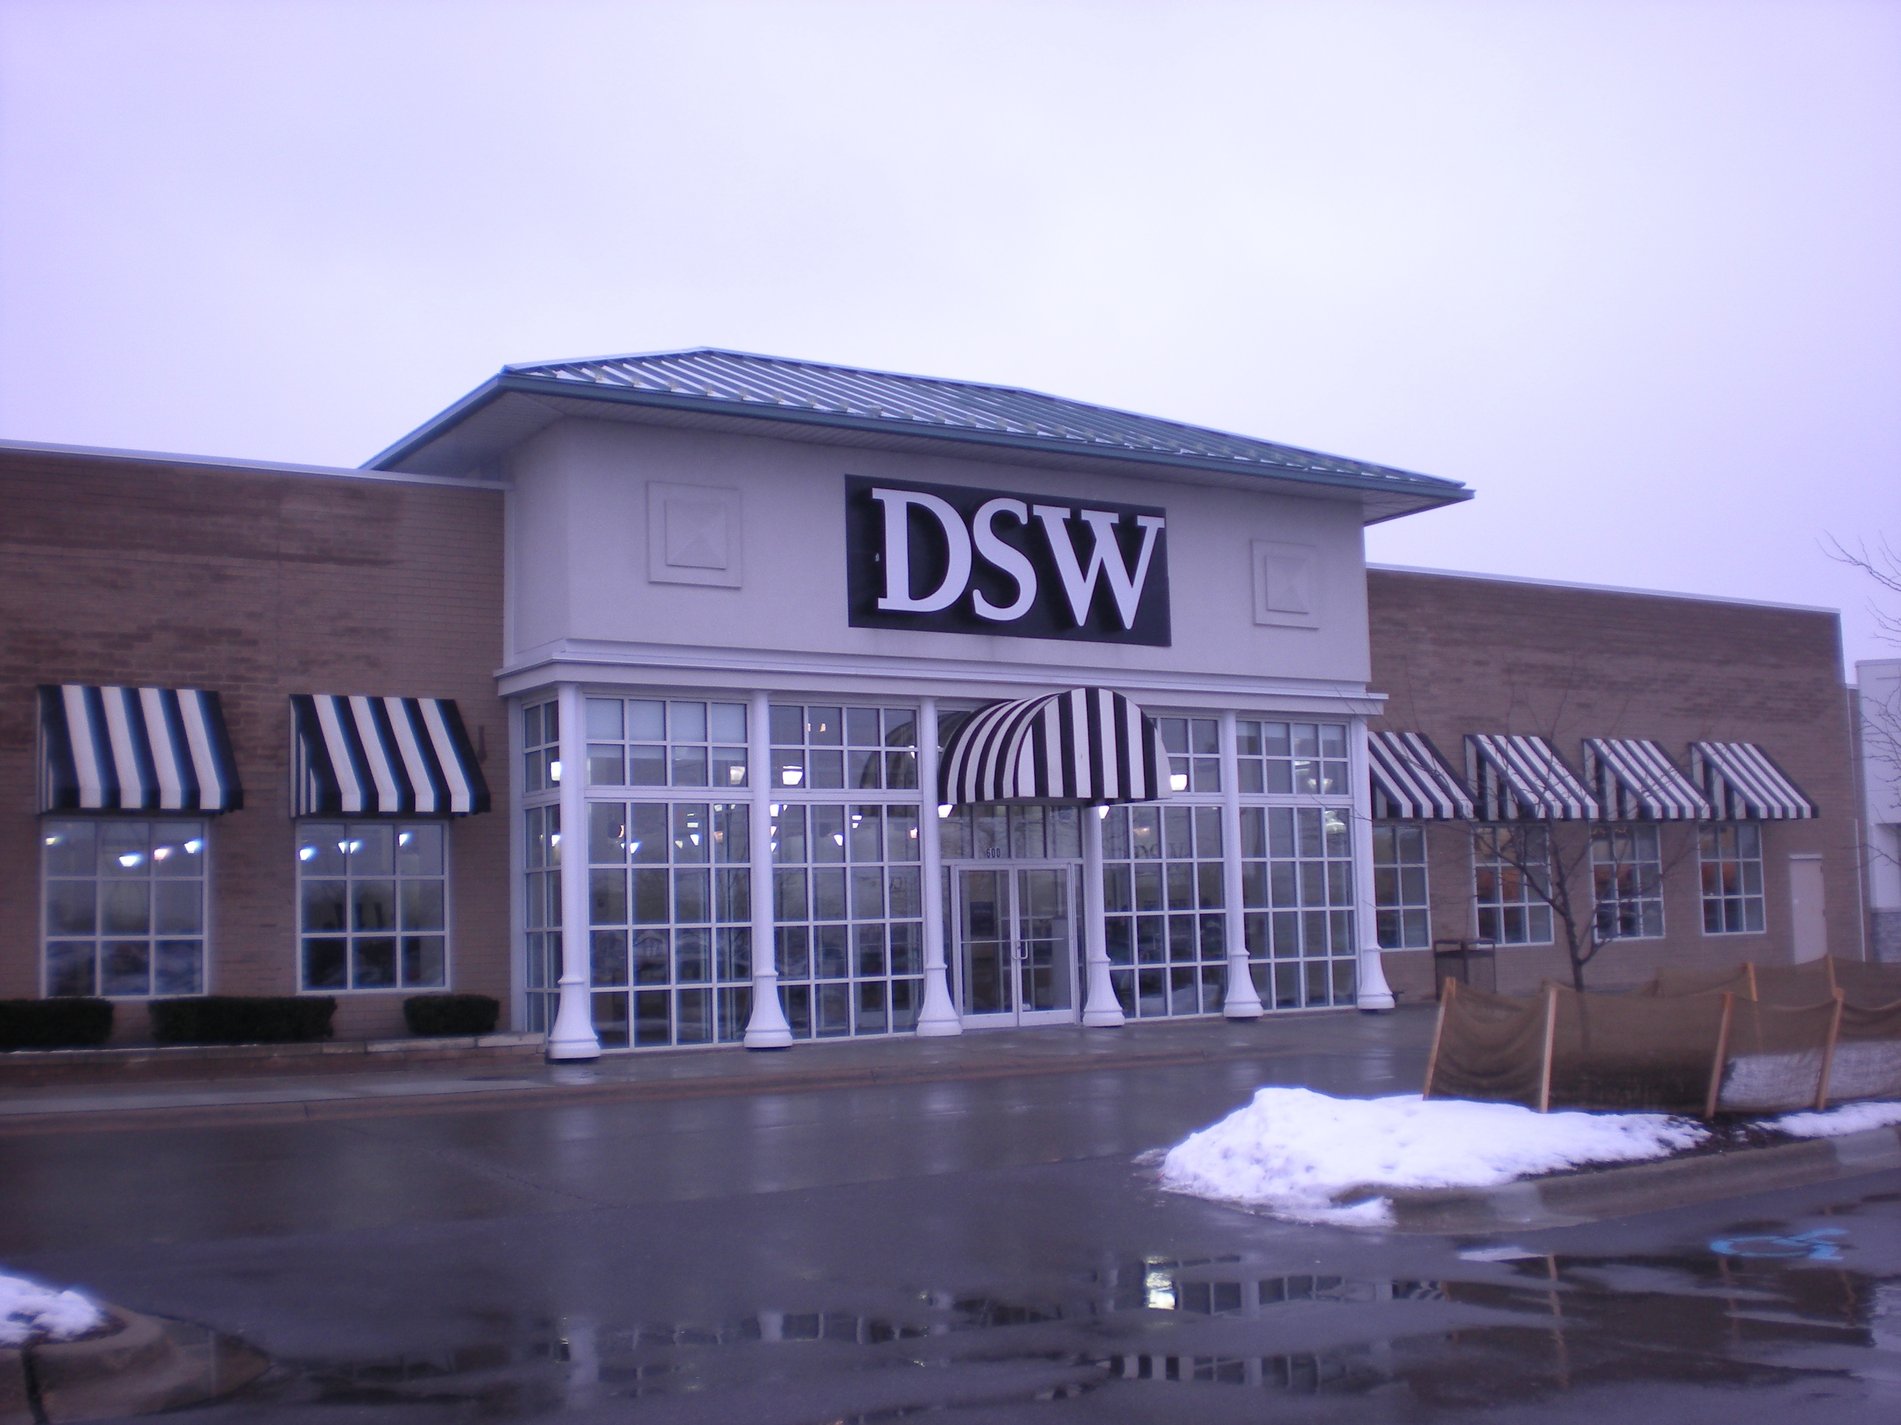 dsw on telegraph and 12 mile